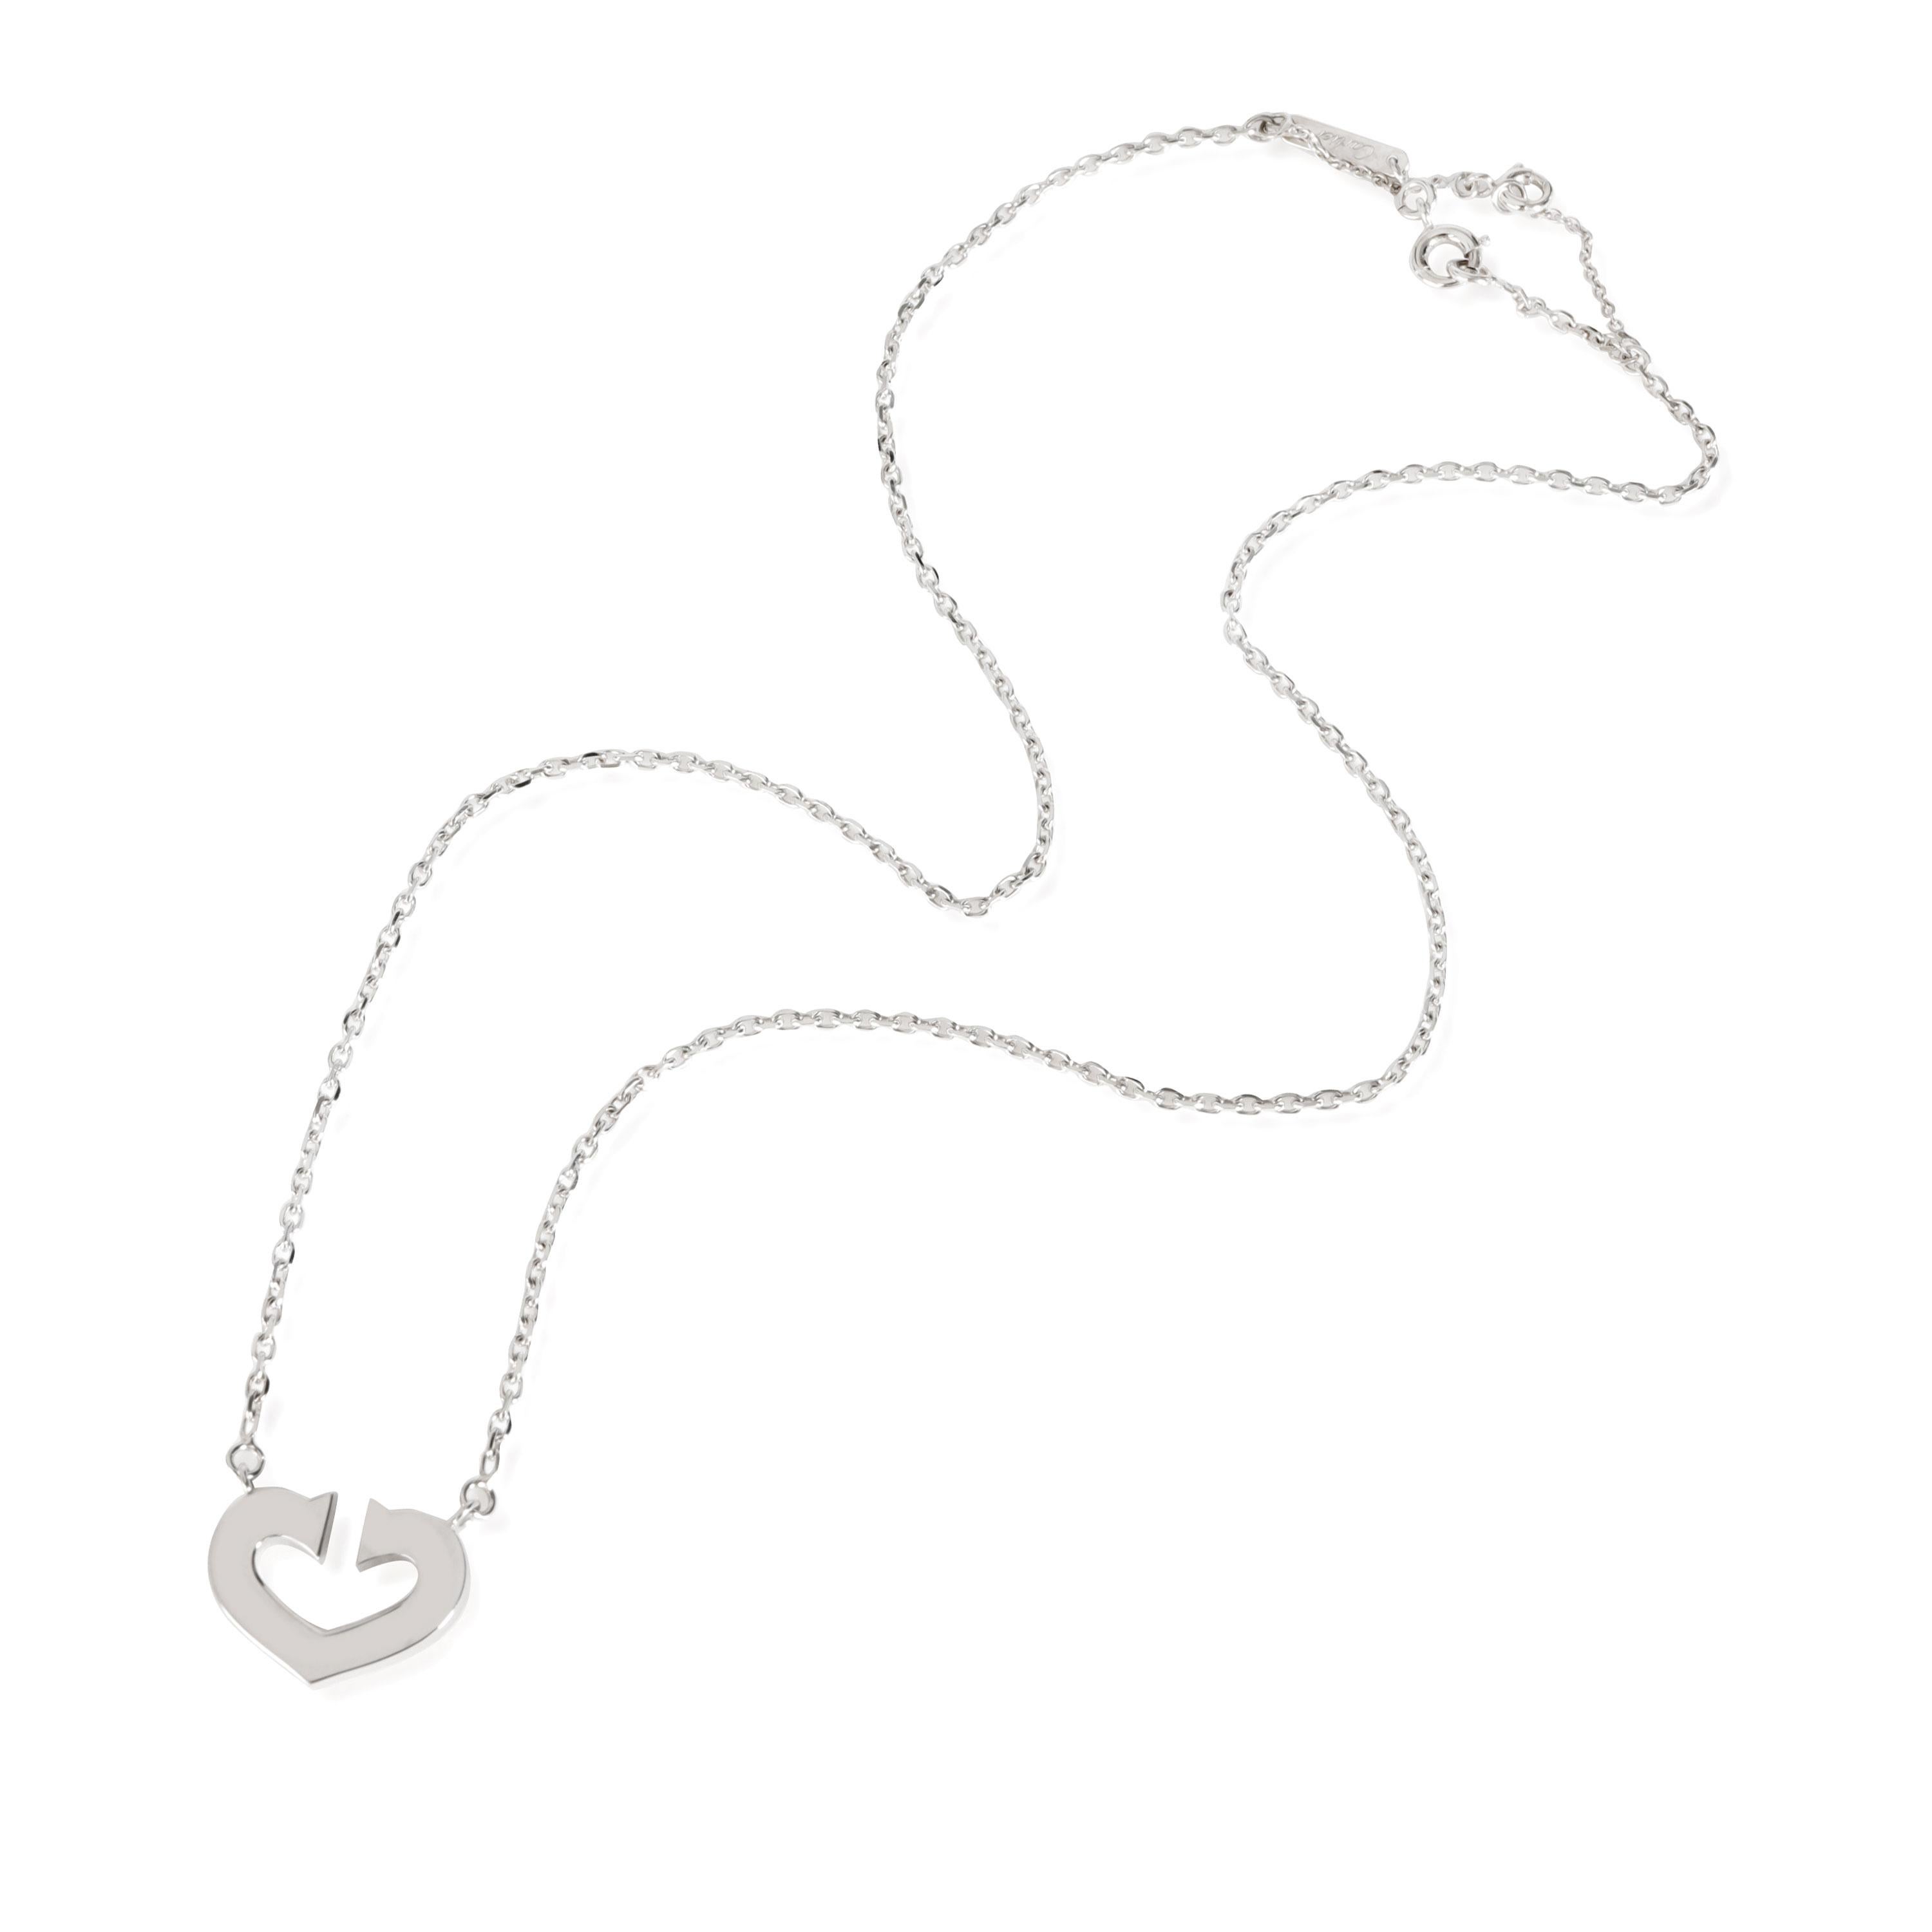 
Cartier C De Cartier Pendant in18K White Gold

PRIMARY DETAILS
SKU: 112704
Listing Title: Cartier C De Cartier Pendant in18K White Gold
Condition Description: Retails for 2,510 USD. In excellent condition and recently polished. The chain is 16